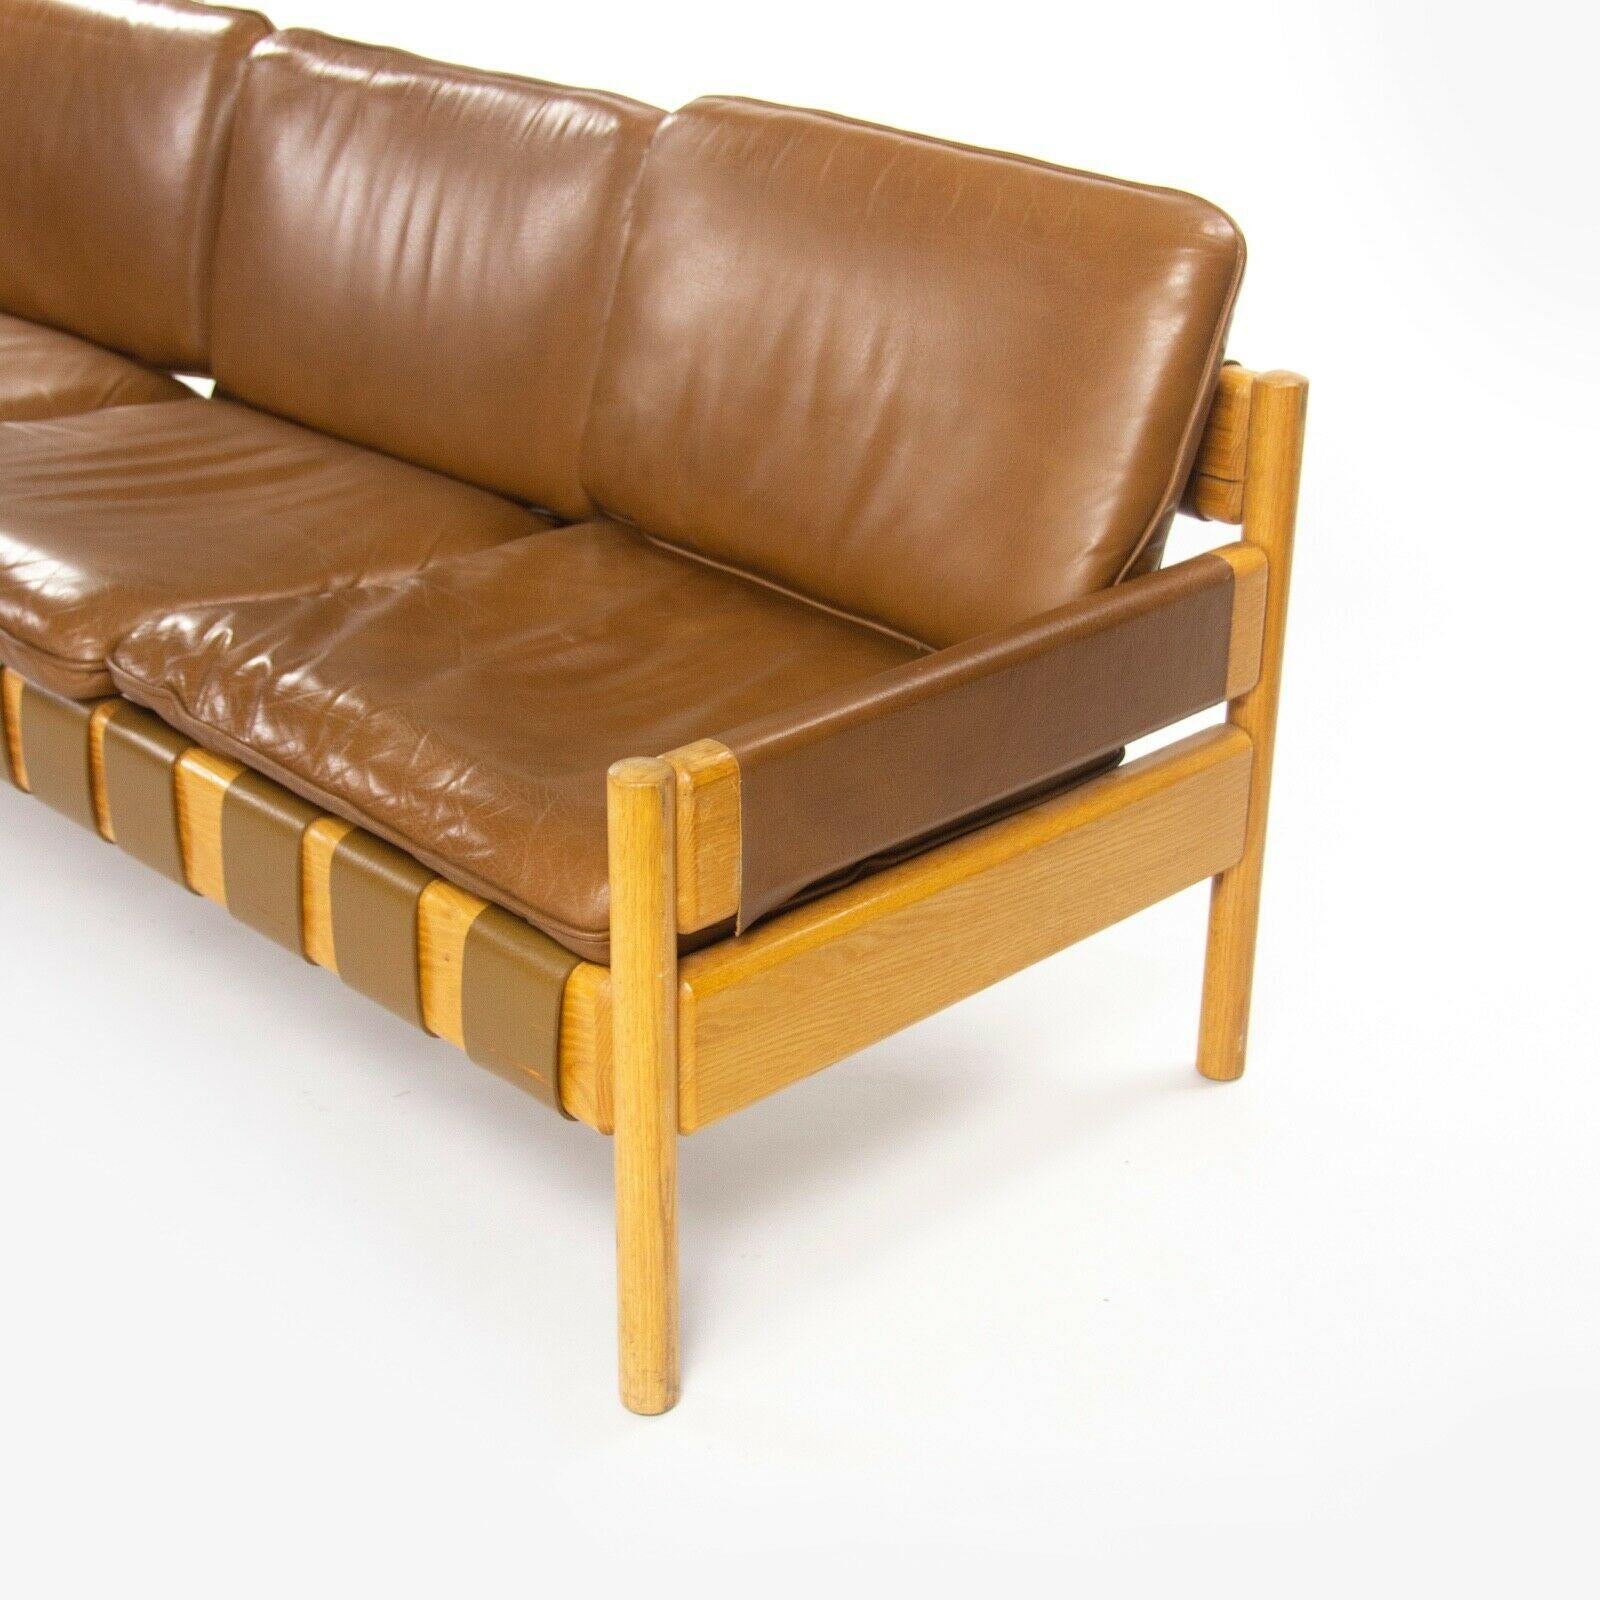 Late 20th Century 1976 Nicos Zographos Saronis Leather & Oak Sofa from Hugh Stubbins Library For Sale